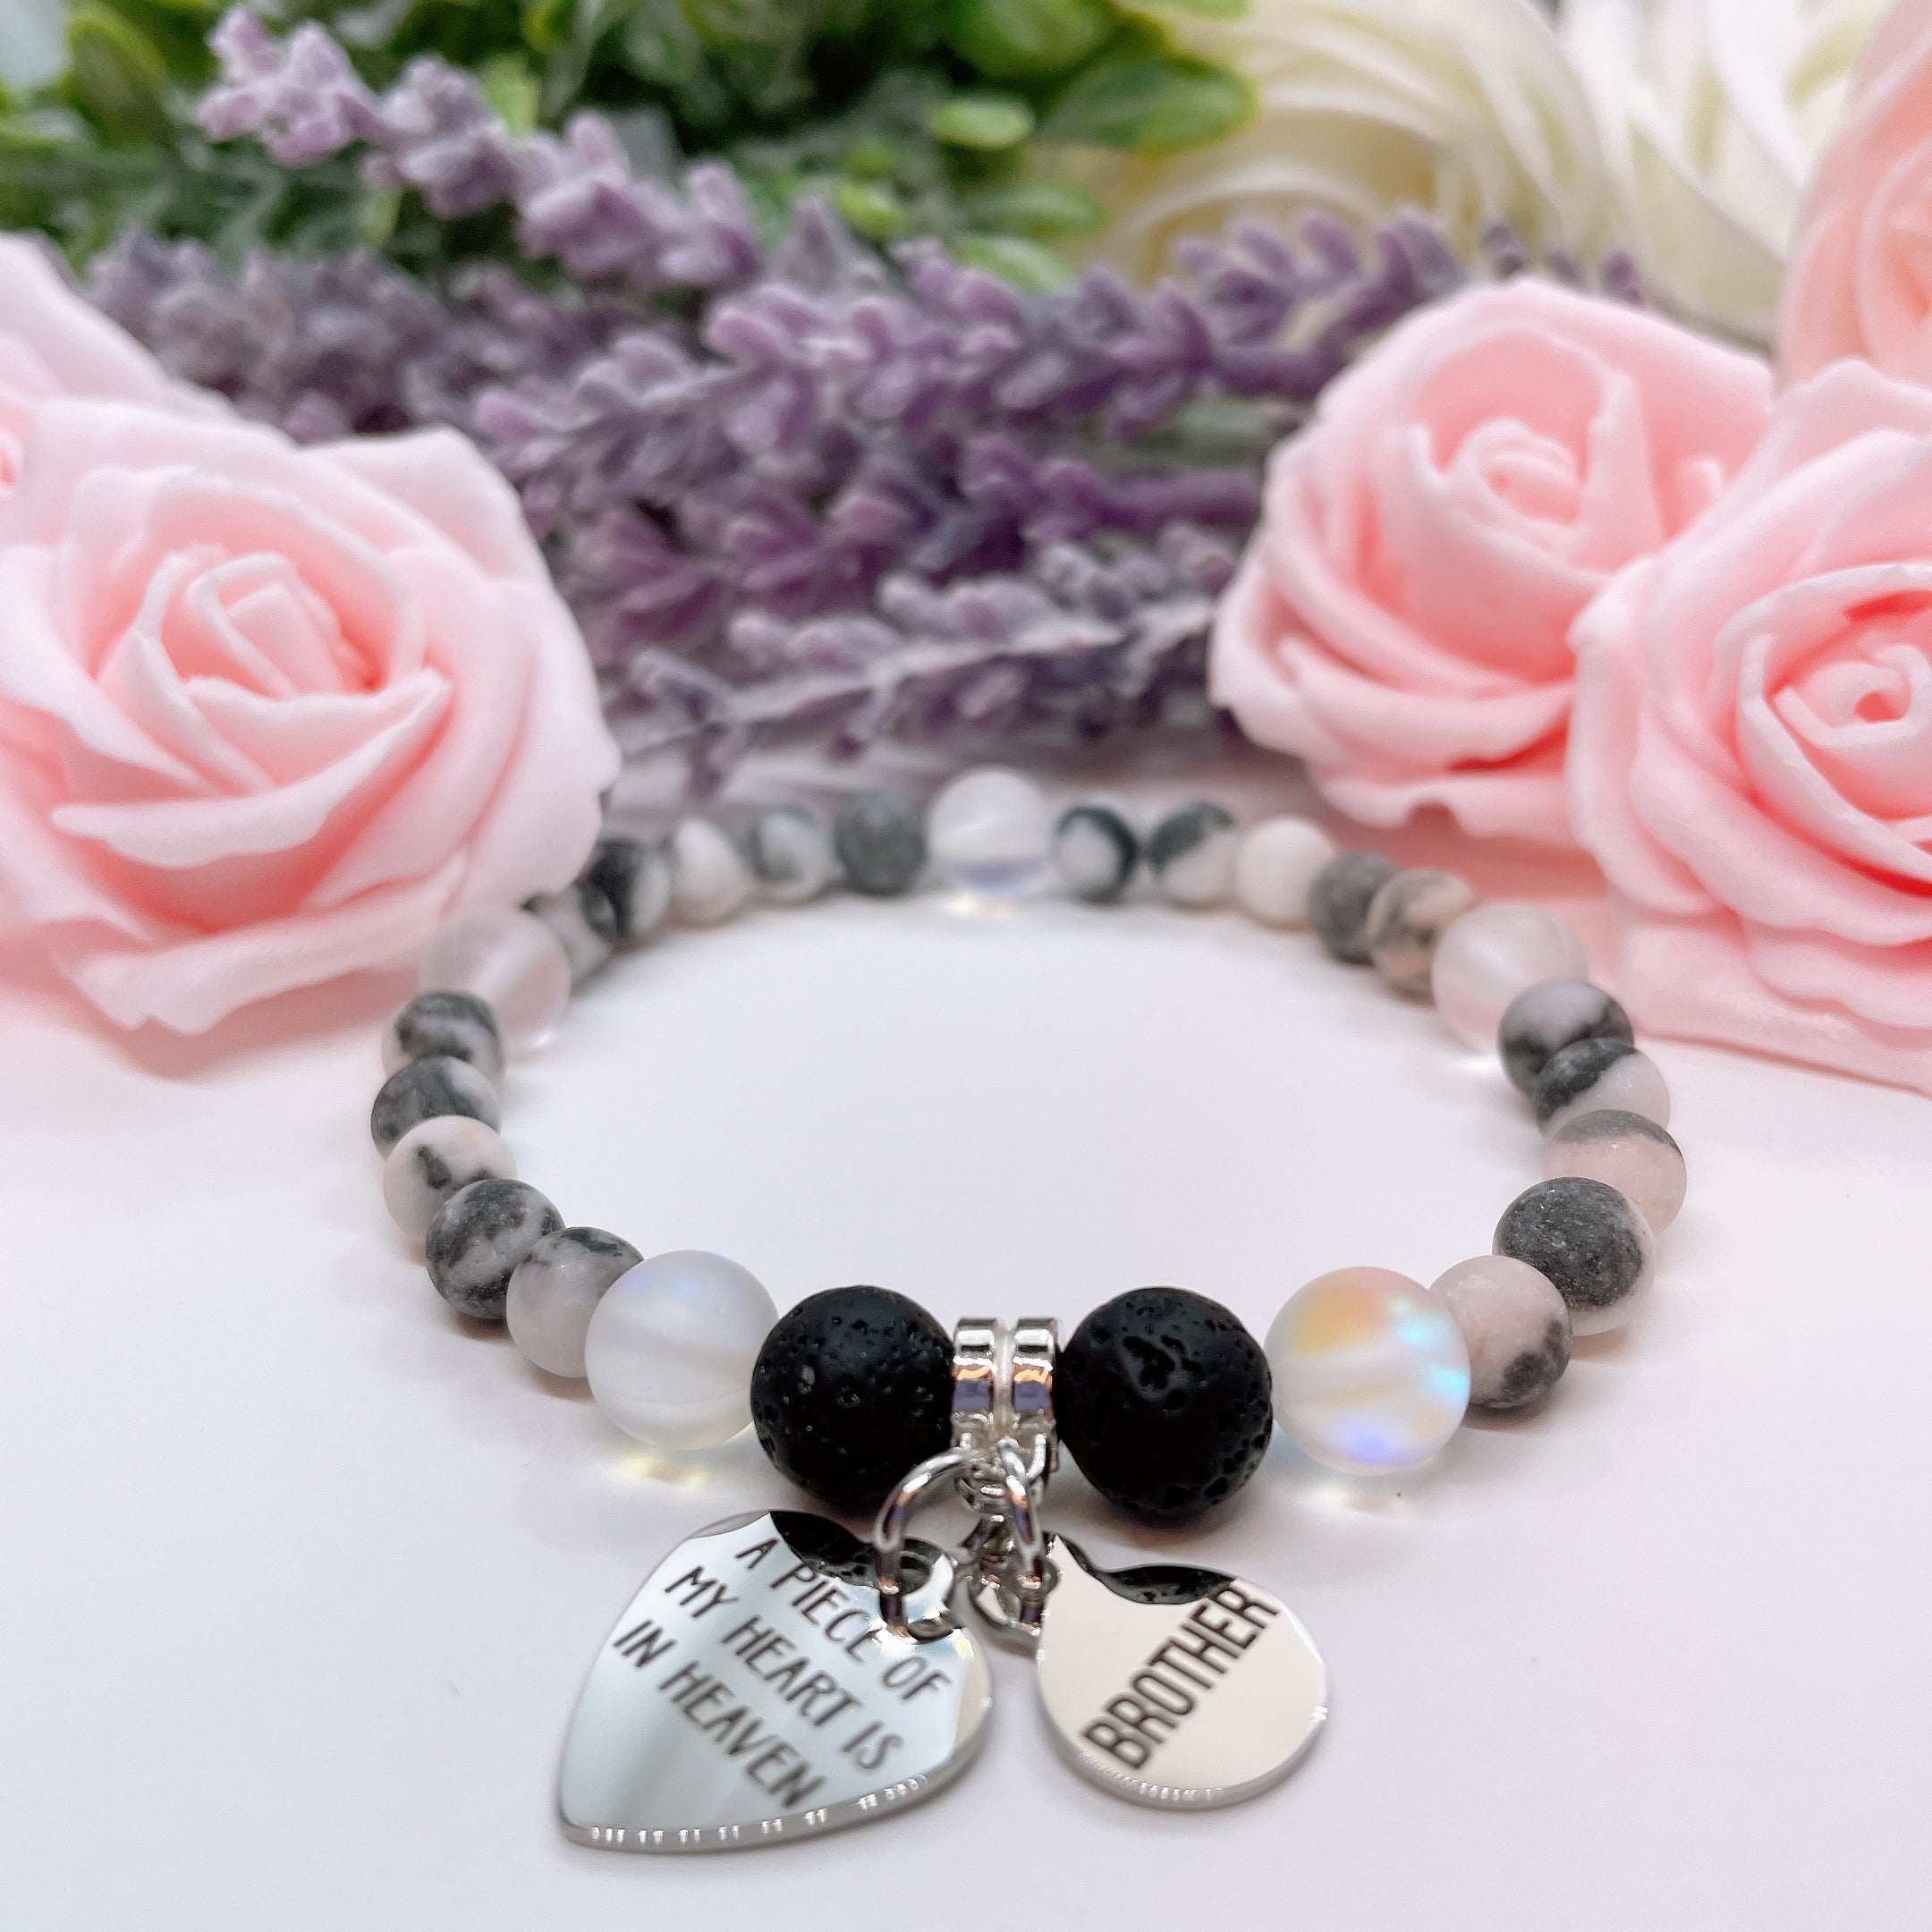 Brother: A Piece of my Heart is in Heaven Heart Companion Charm Bracelet